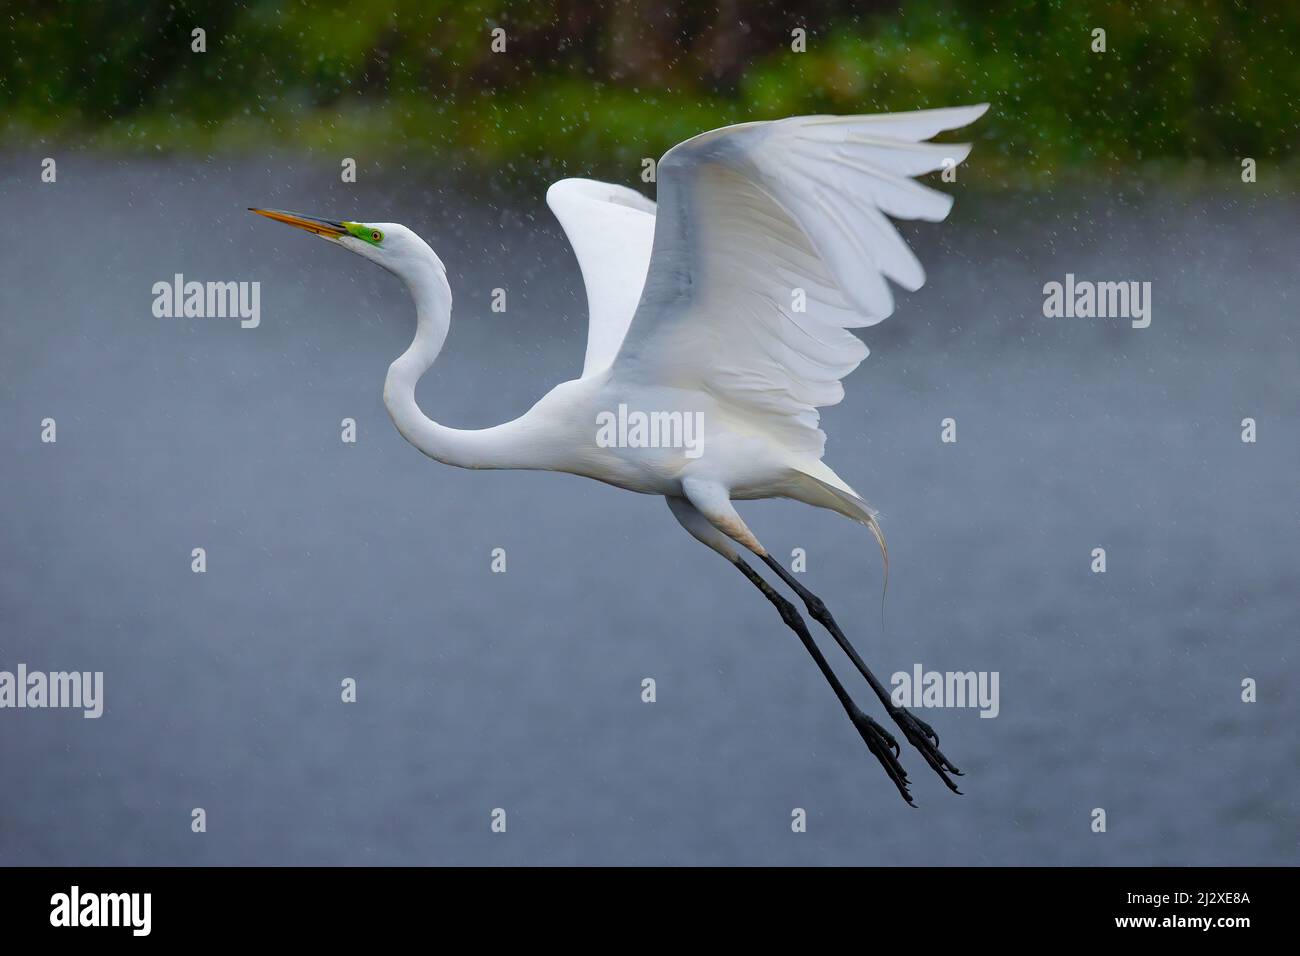 A great white egret takes flight in the rain at Everglades National Park. Stock Photo